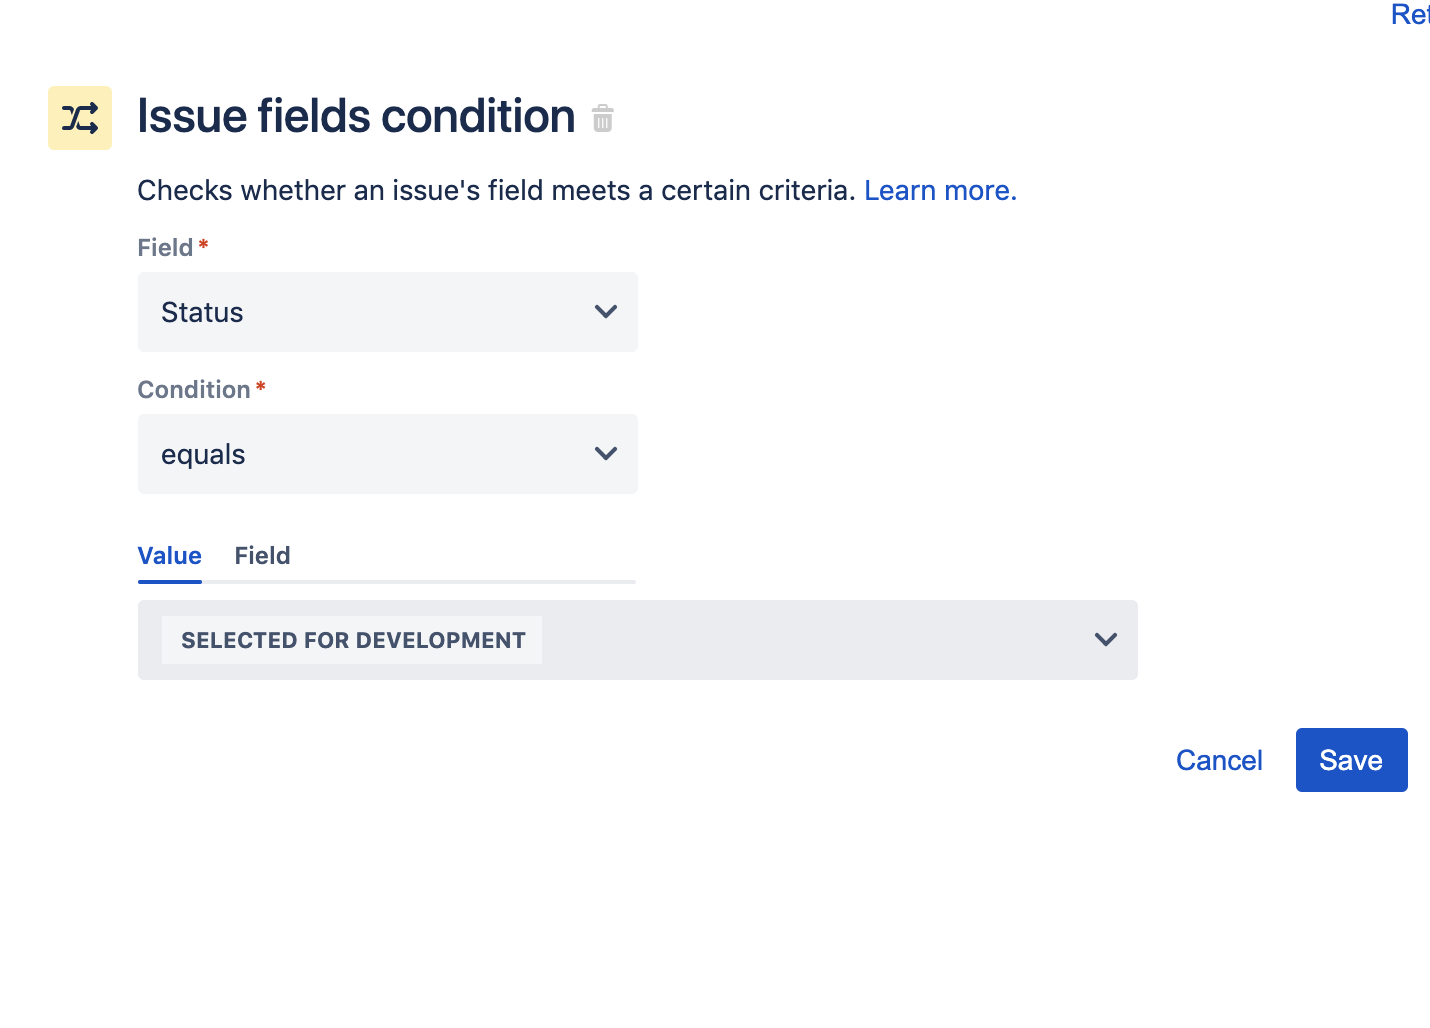 Issue fields condition. Checks whether an issue's field meets a certain criteria. Field: Status; Condition: equals; Value: “selected for development”